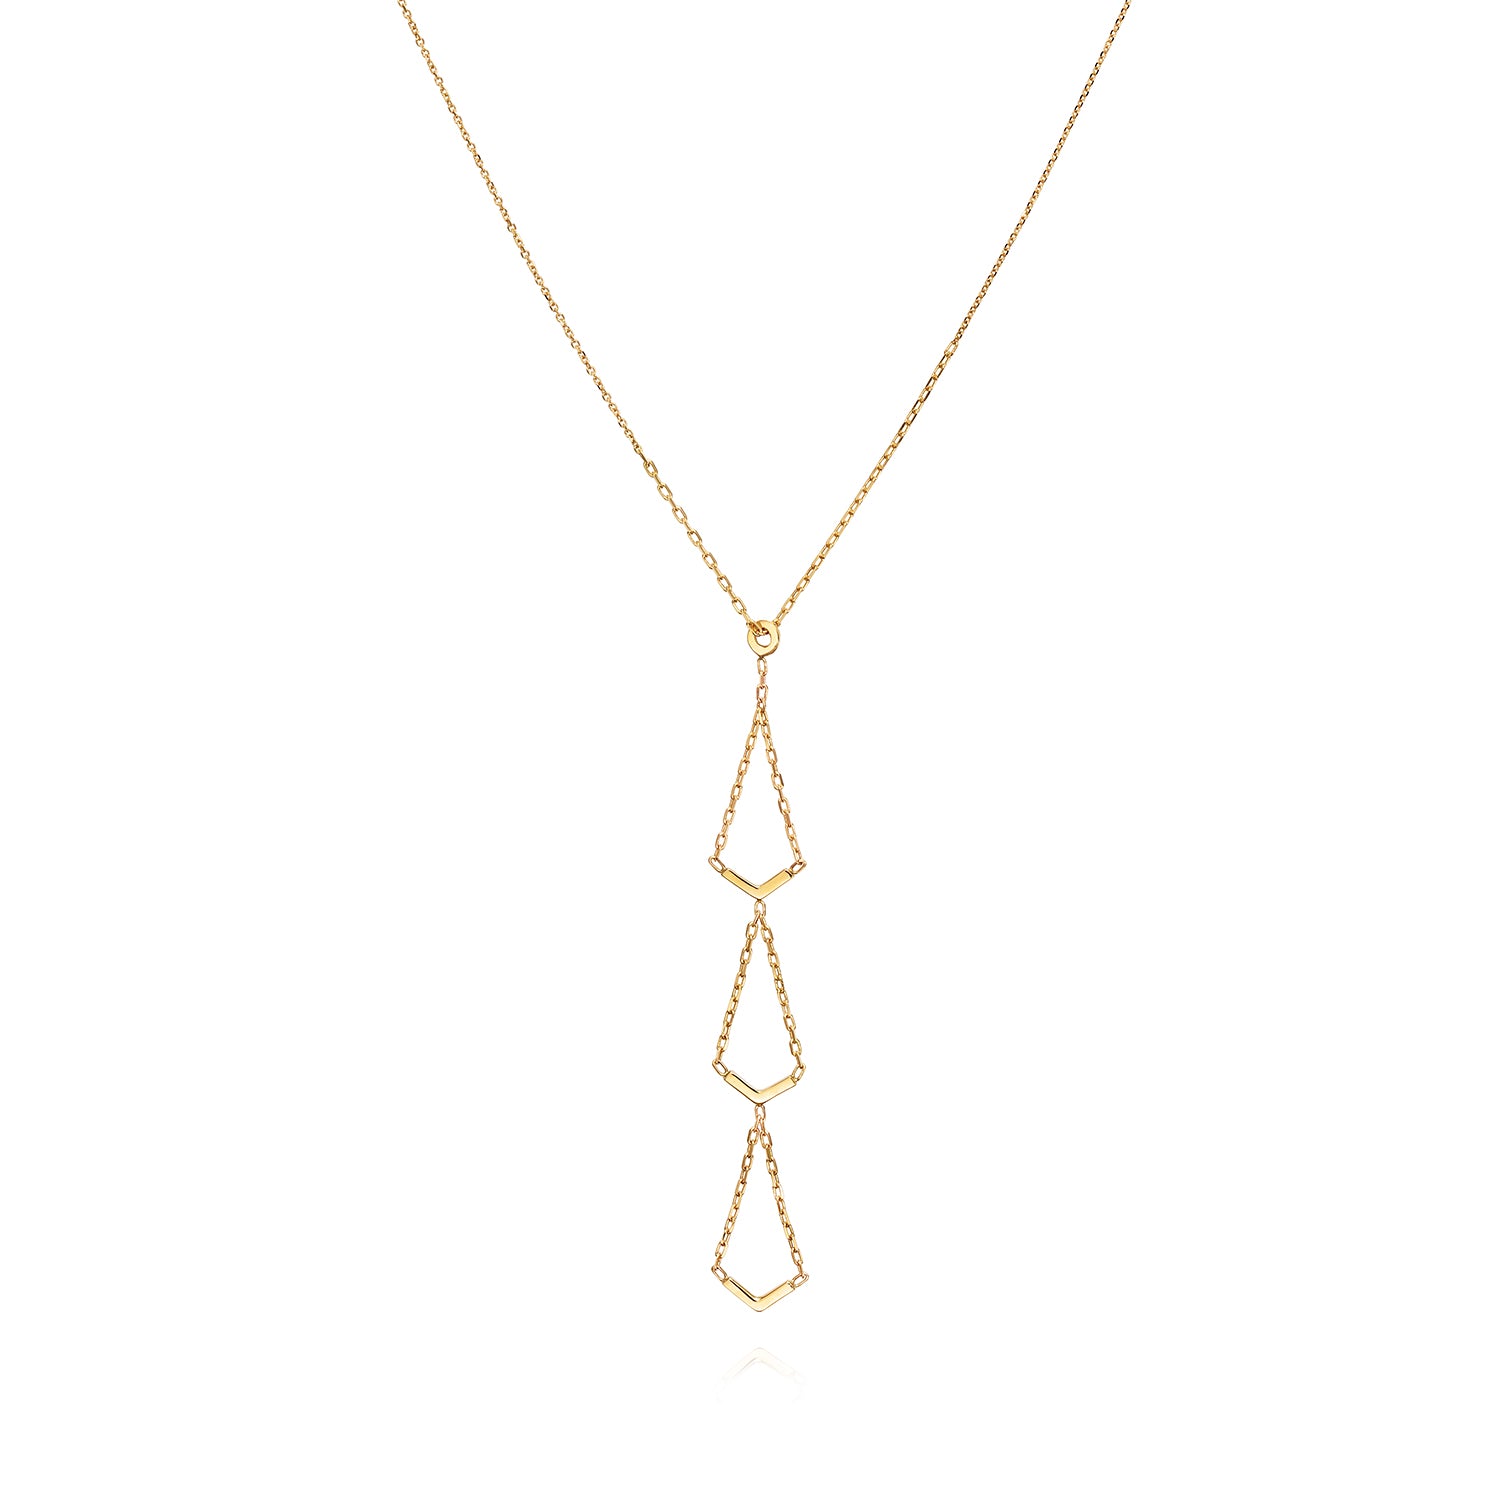 18ct yellow gold necklace with triple V-shaped drops 